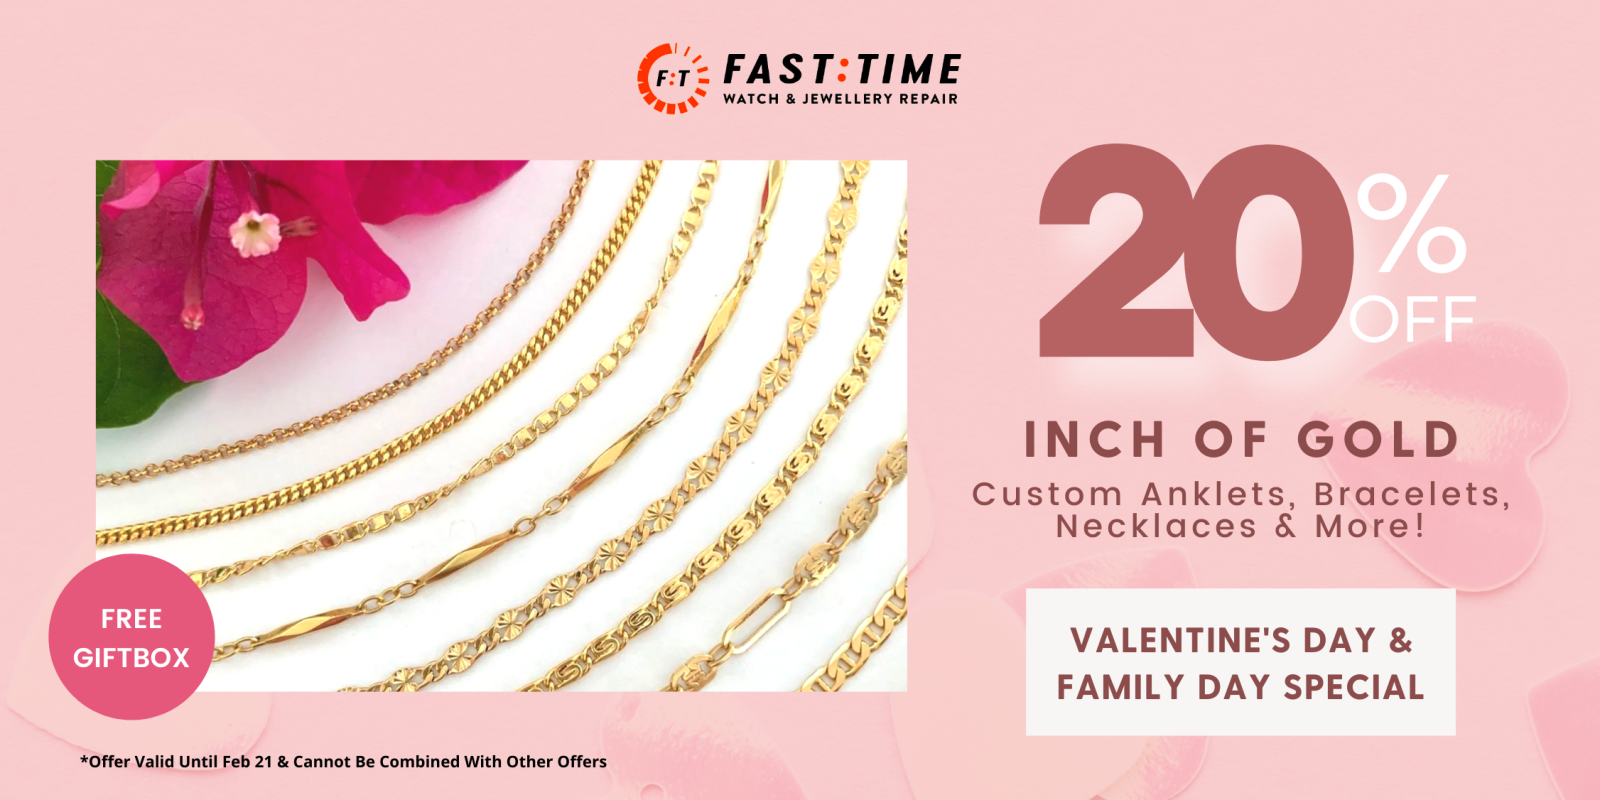 [Image] [offer] 20 % OFF INCH OF GOLD CUSTOM JEWELLERY